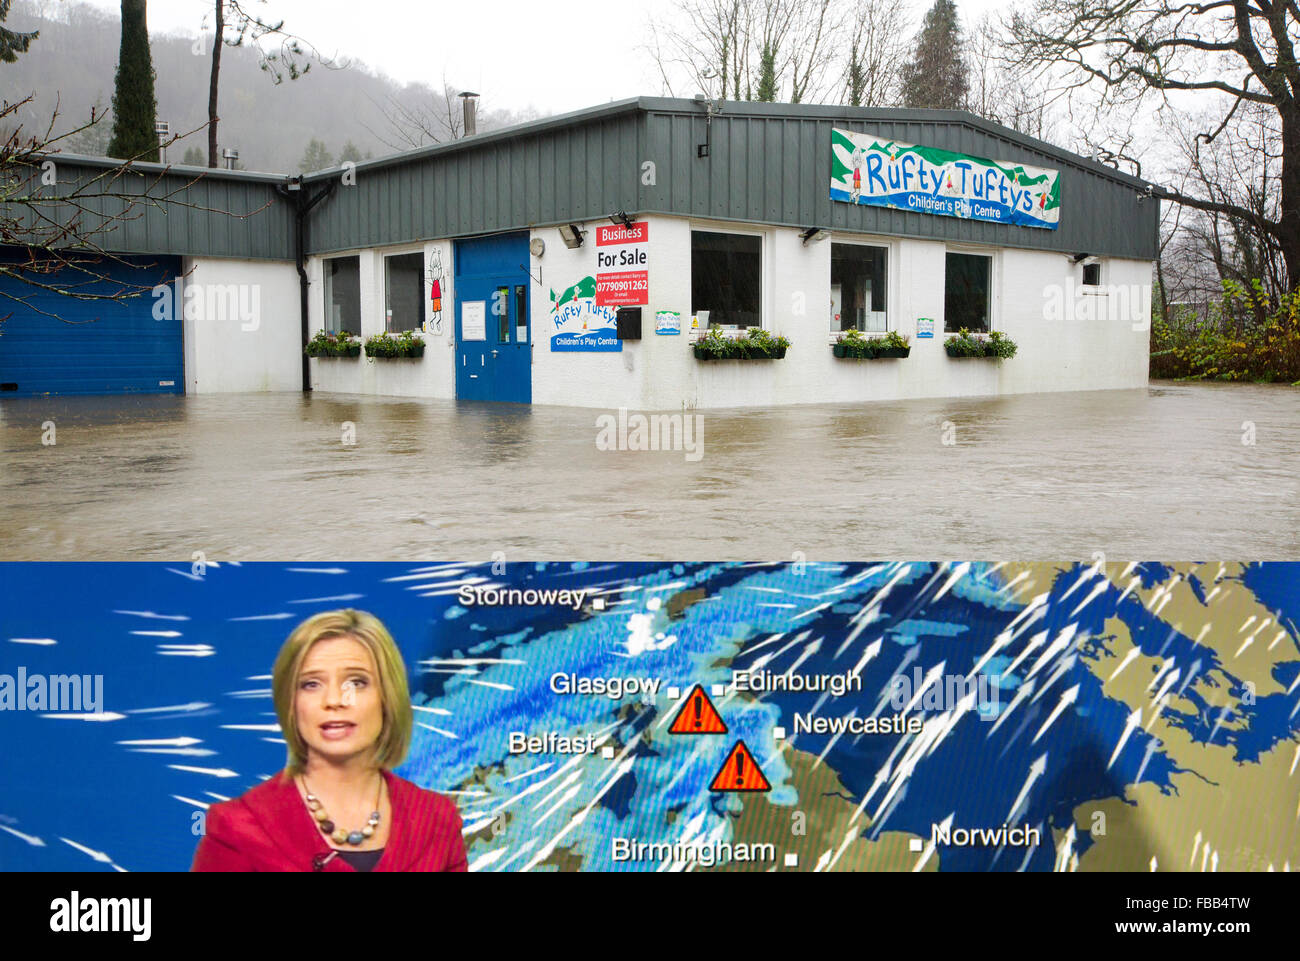 A composite image of the Storm Desmond weather forecast and its impacts, here a childrens play centre surrounded by flood waters Stock Photo